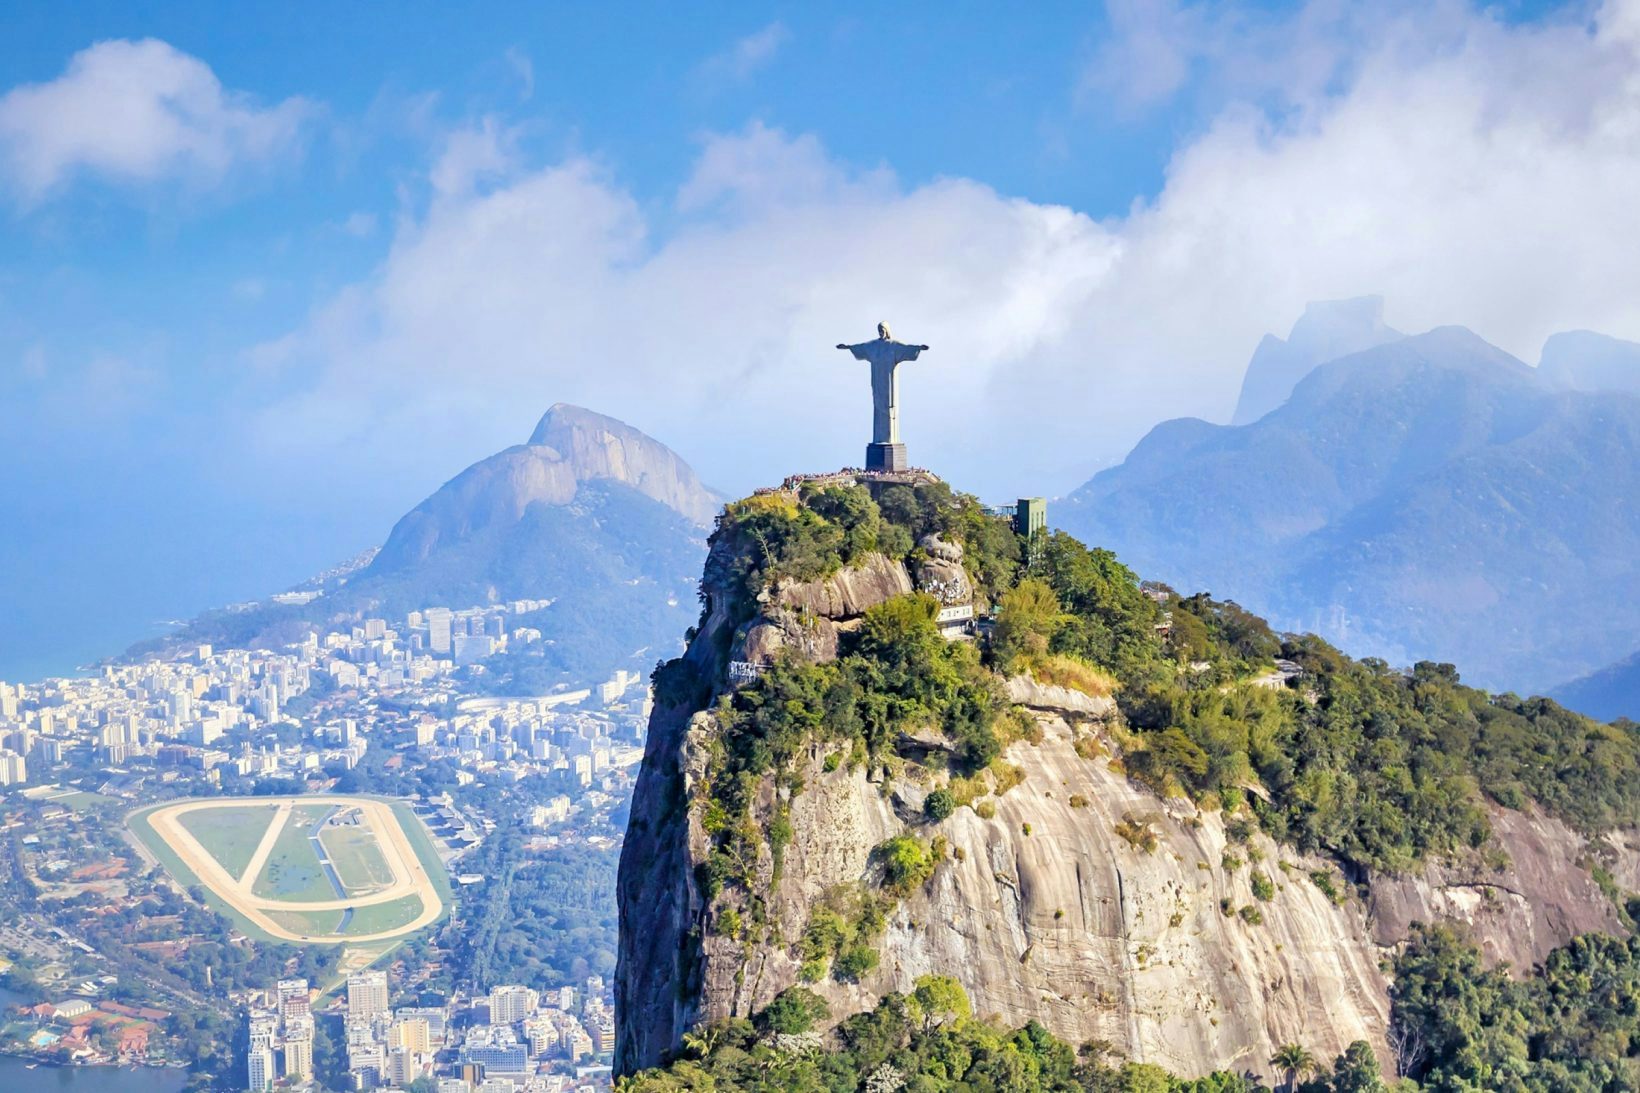 Brazil: Its Strong Growth Potential is Becoming Strategic for Luxury